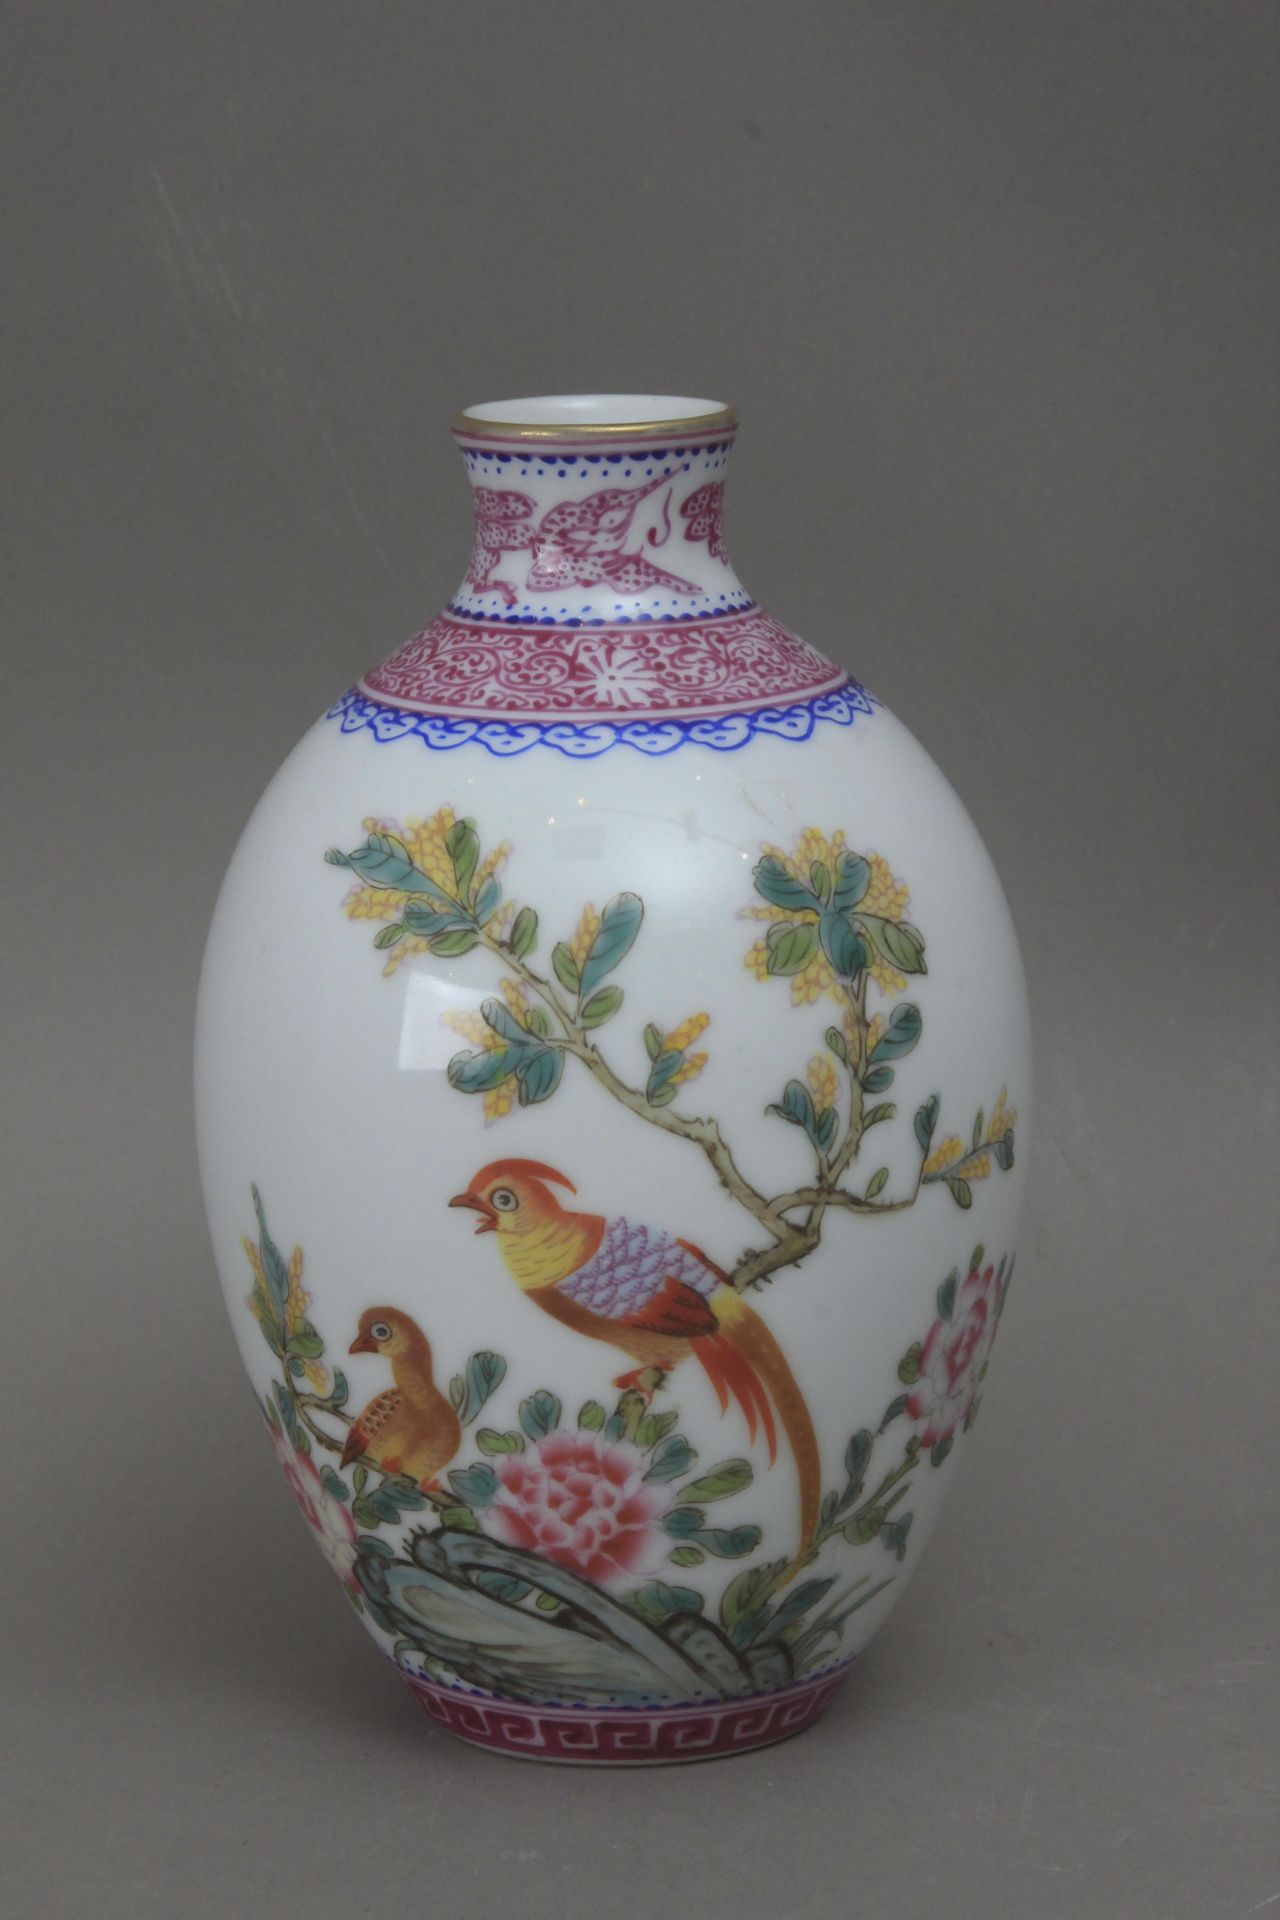 A 20th century Chinese vase from Republic period in Famille Rose porcelain